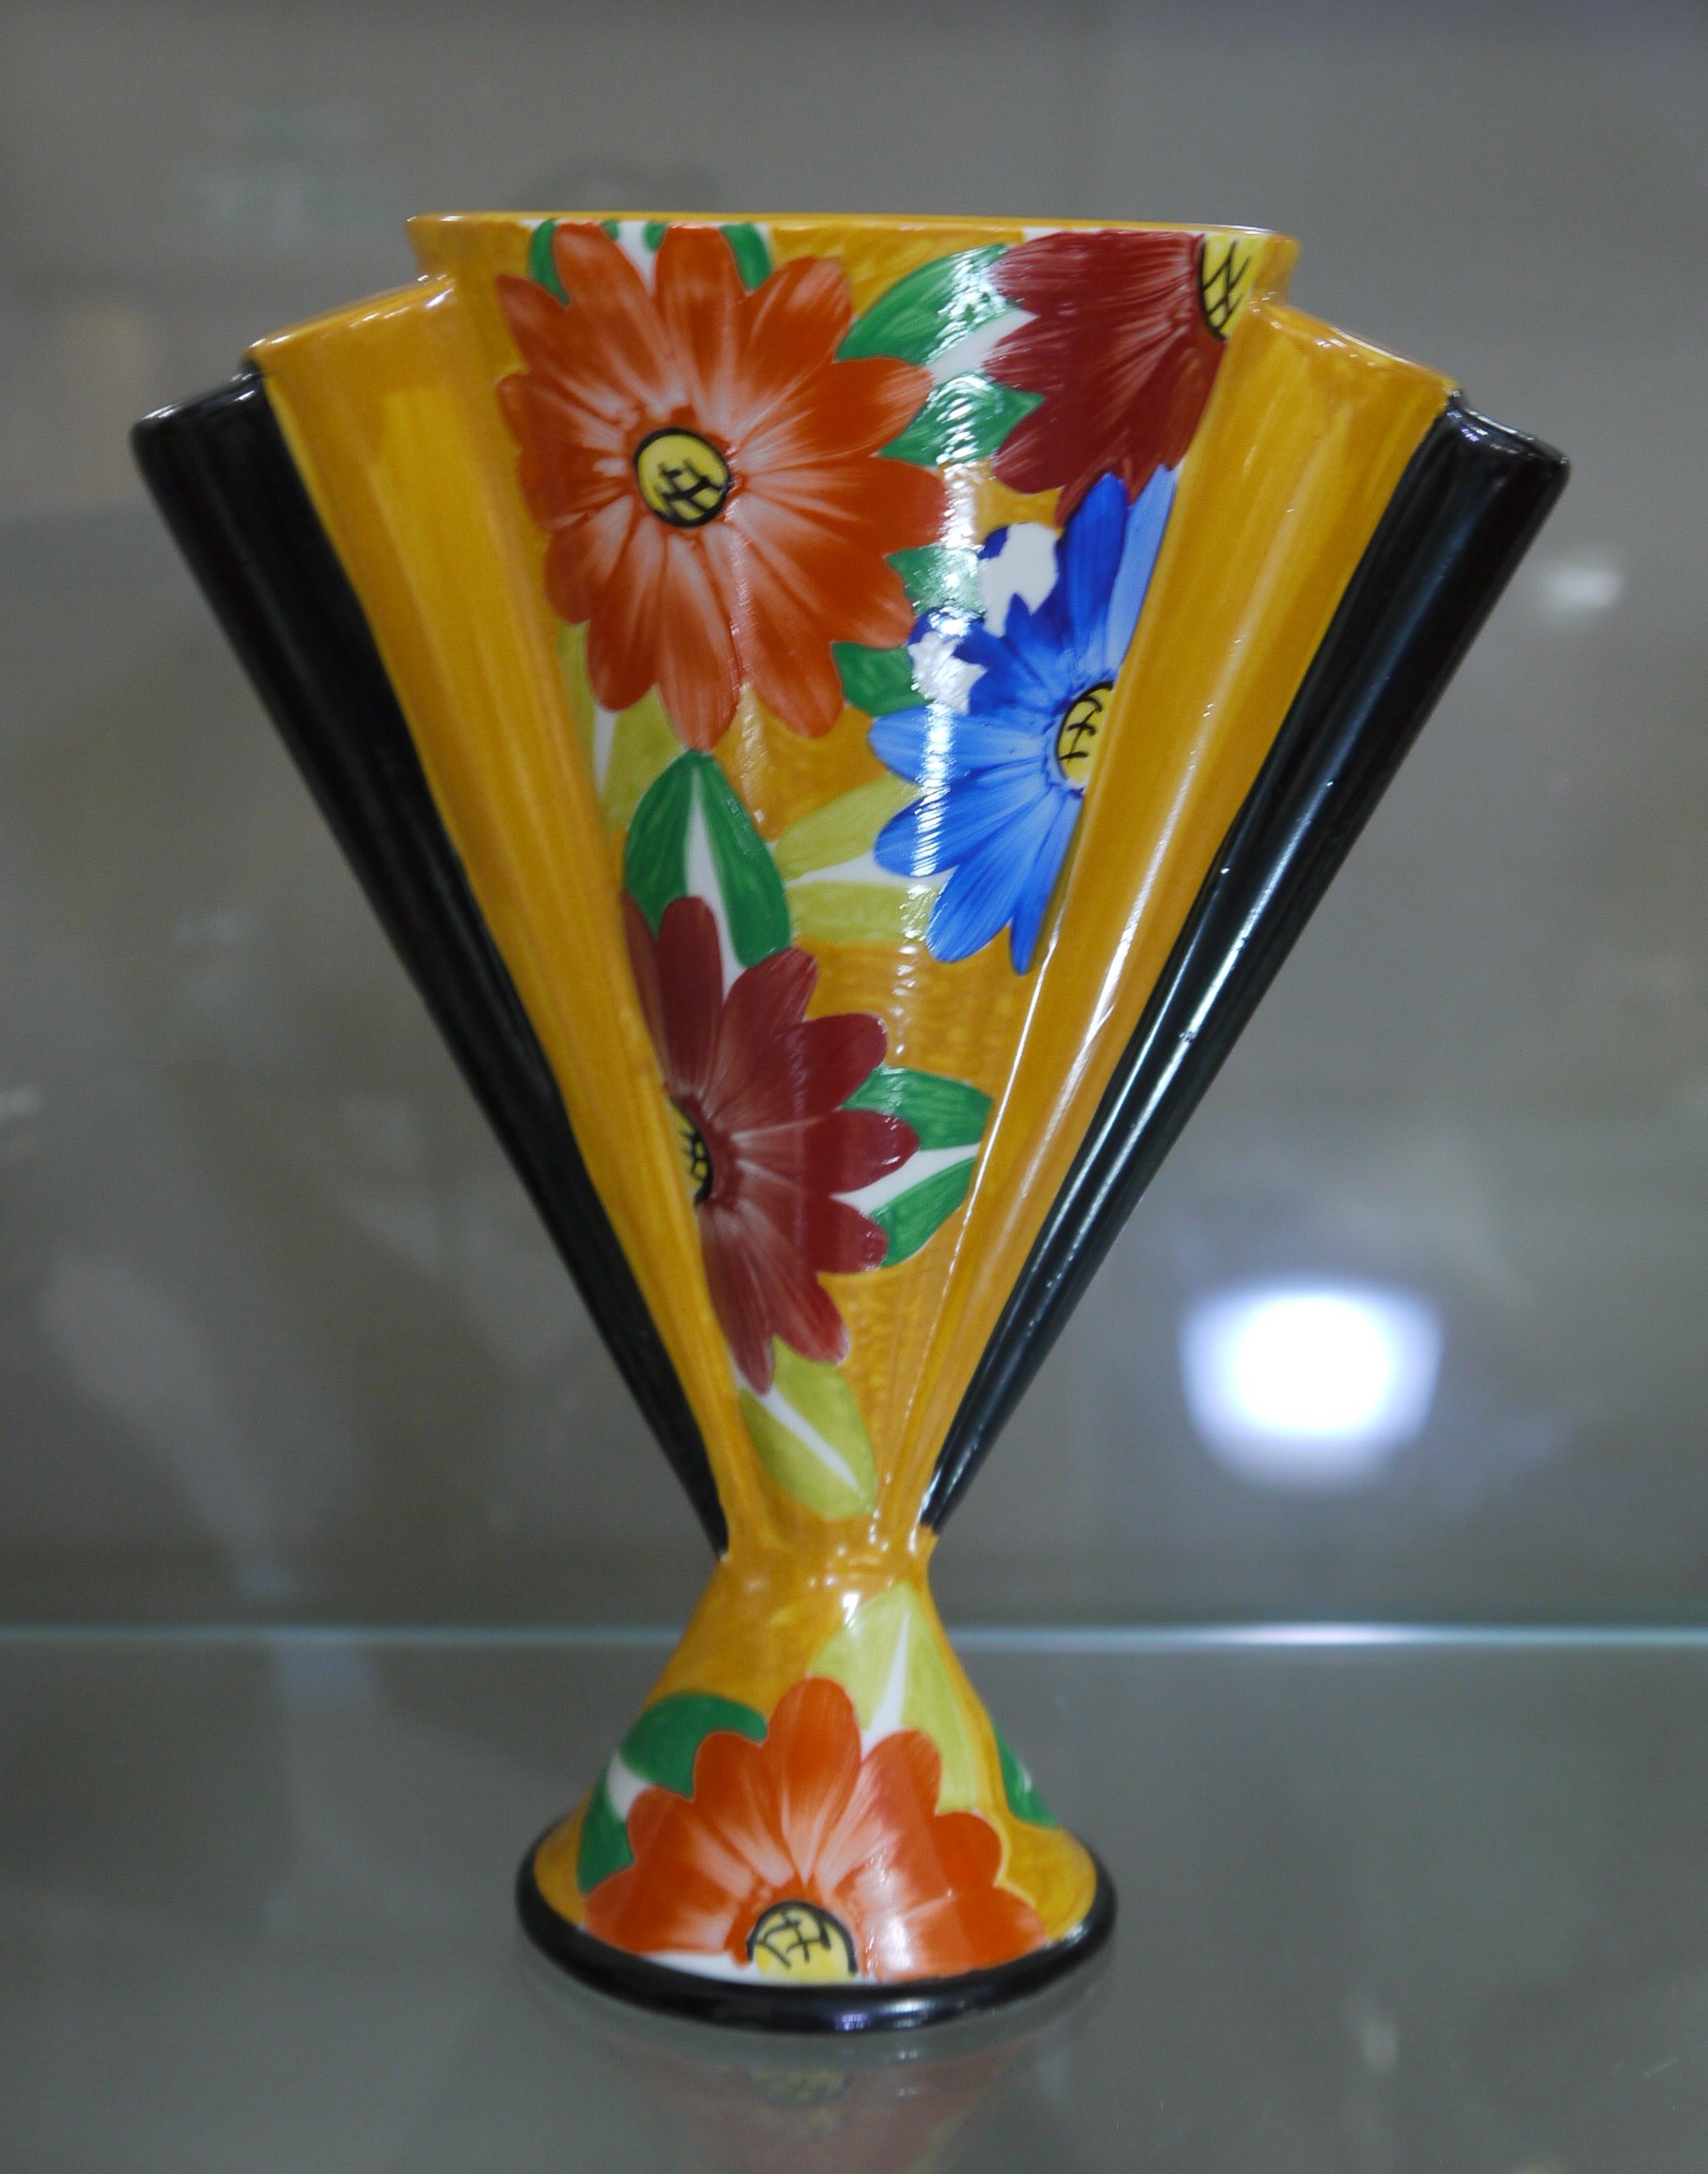 A Dean Sherwin ceramic vase in Deco style, fan shaped with flowers in yellow and black, 18.